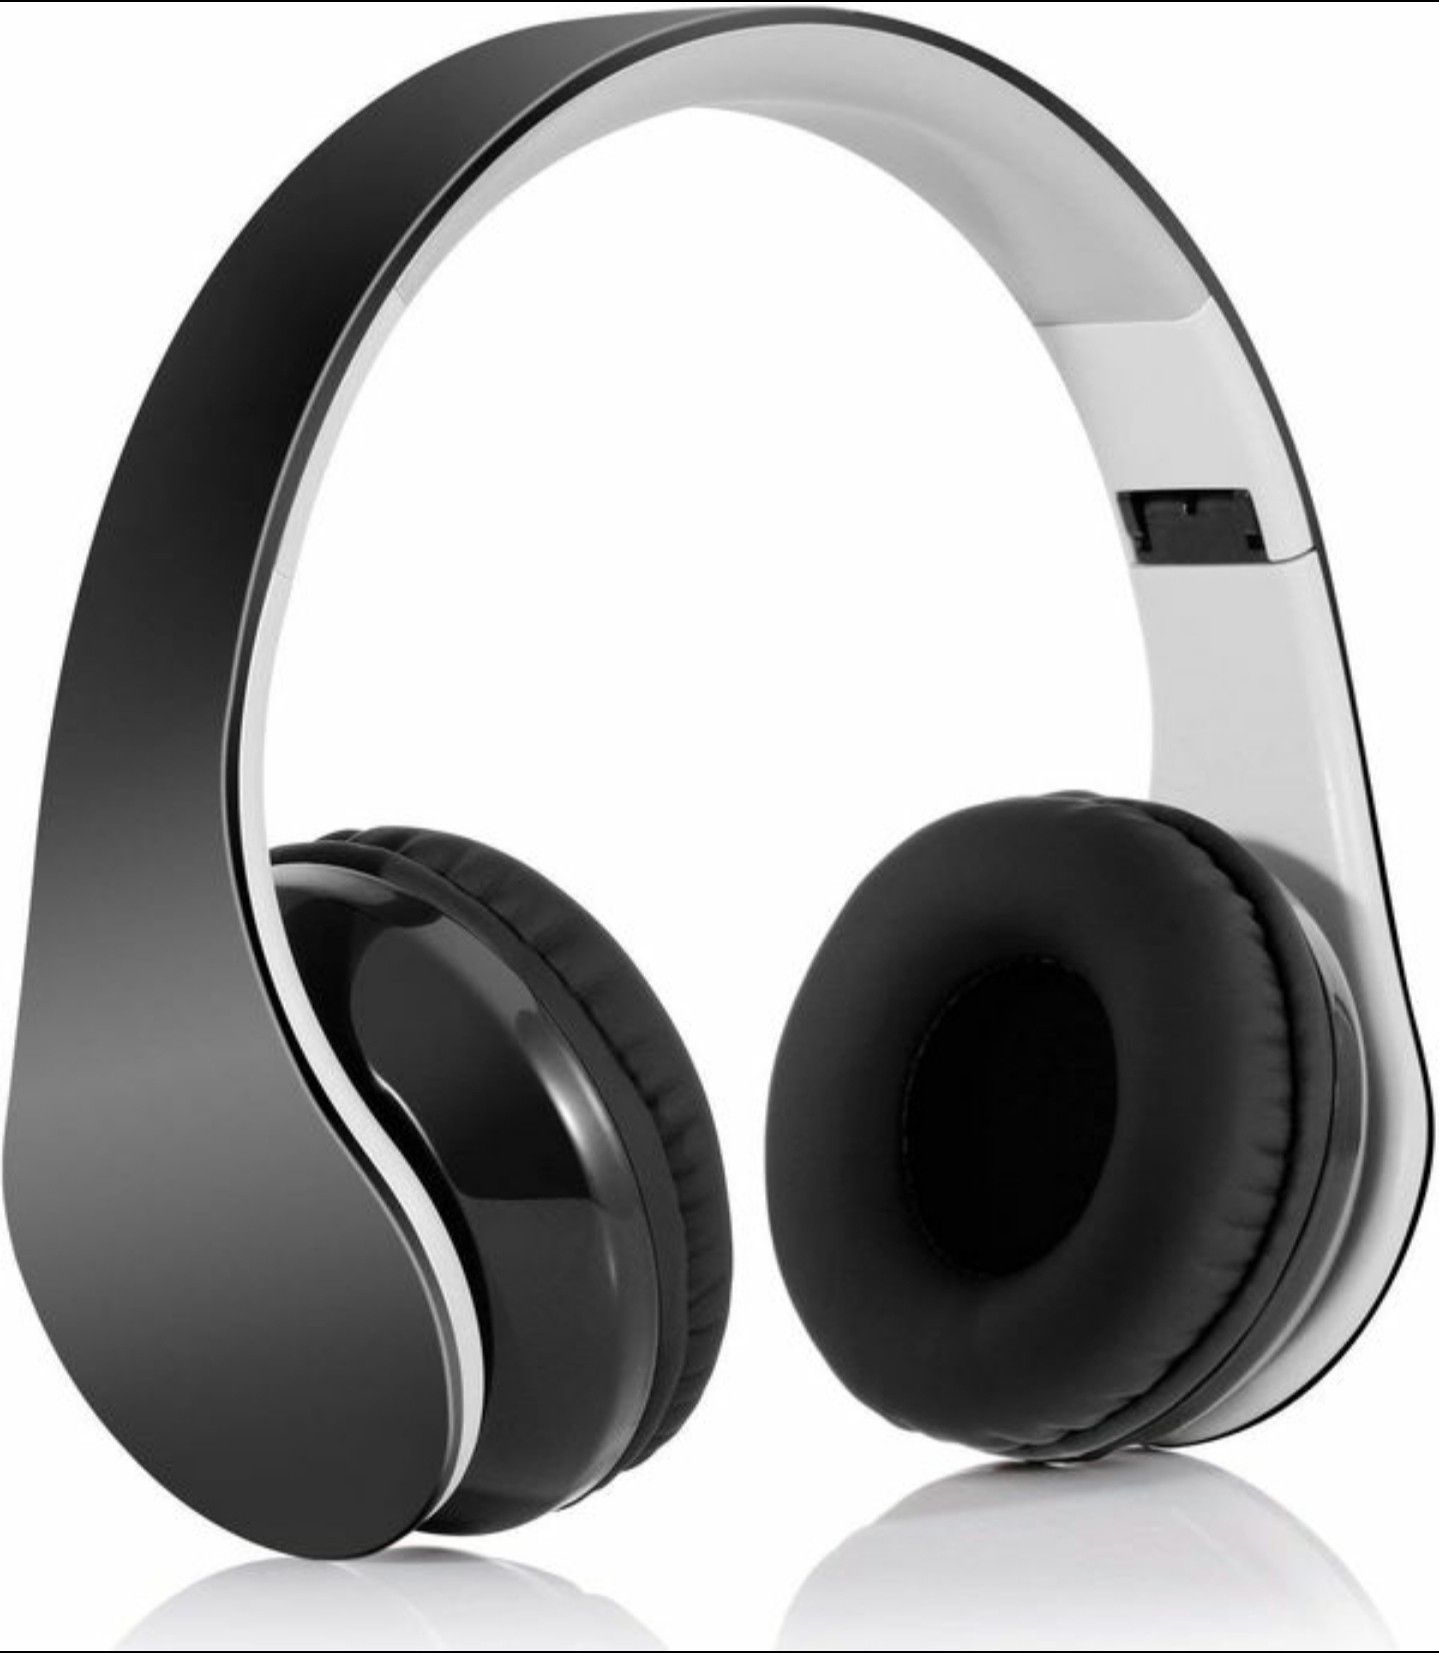 Bluetooth Headphones Wireless Headset Over Ear - Foldable Hi-Fi Stereo Headset with Built-in Mic